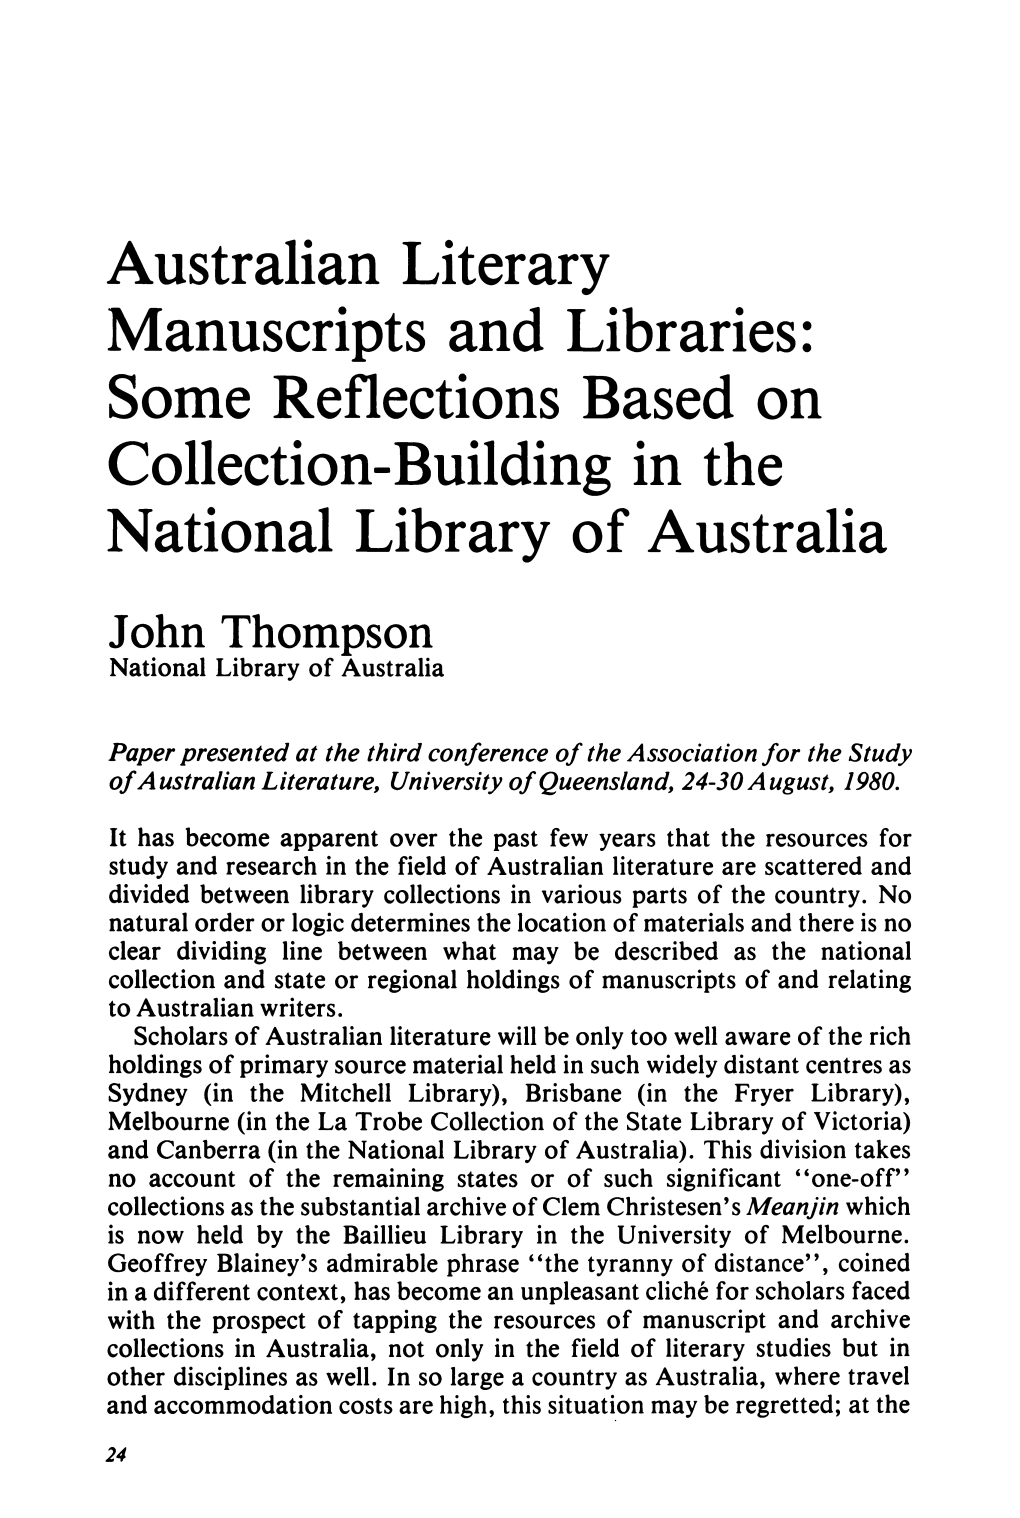 Australian Literary Manuscripts and Libraries: Some Reflections Based on Collection-Building in the National Library of Australia